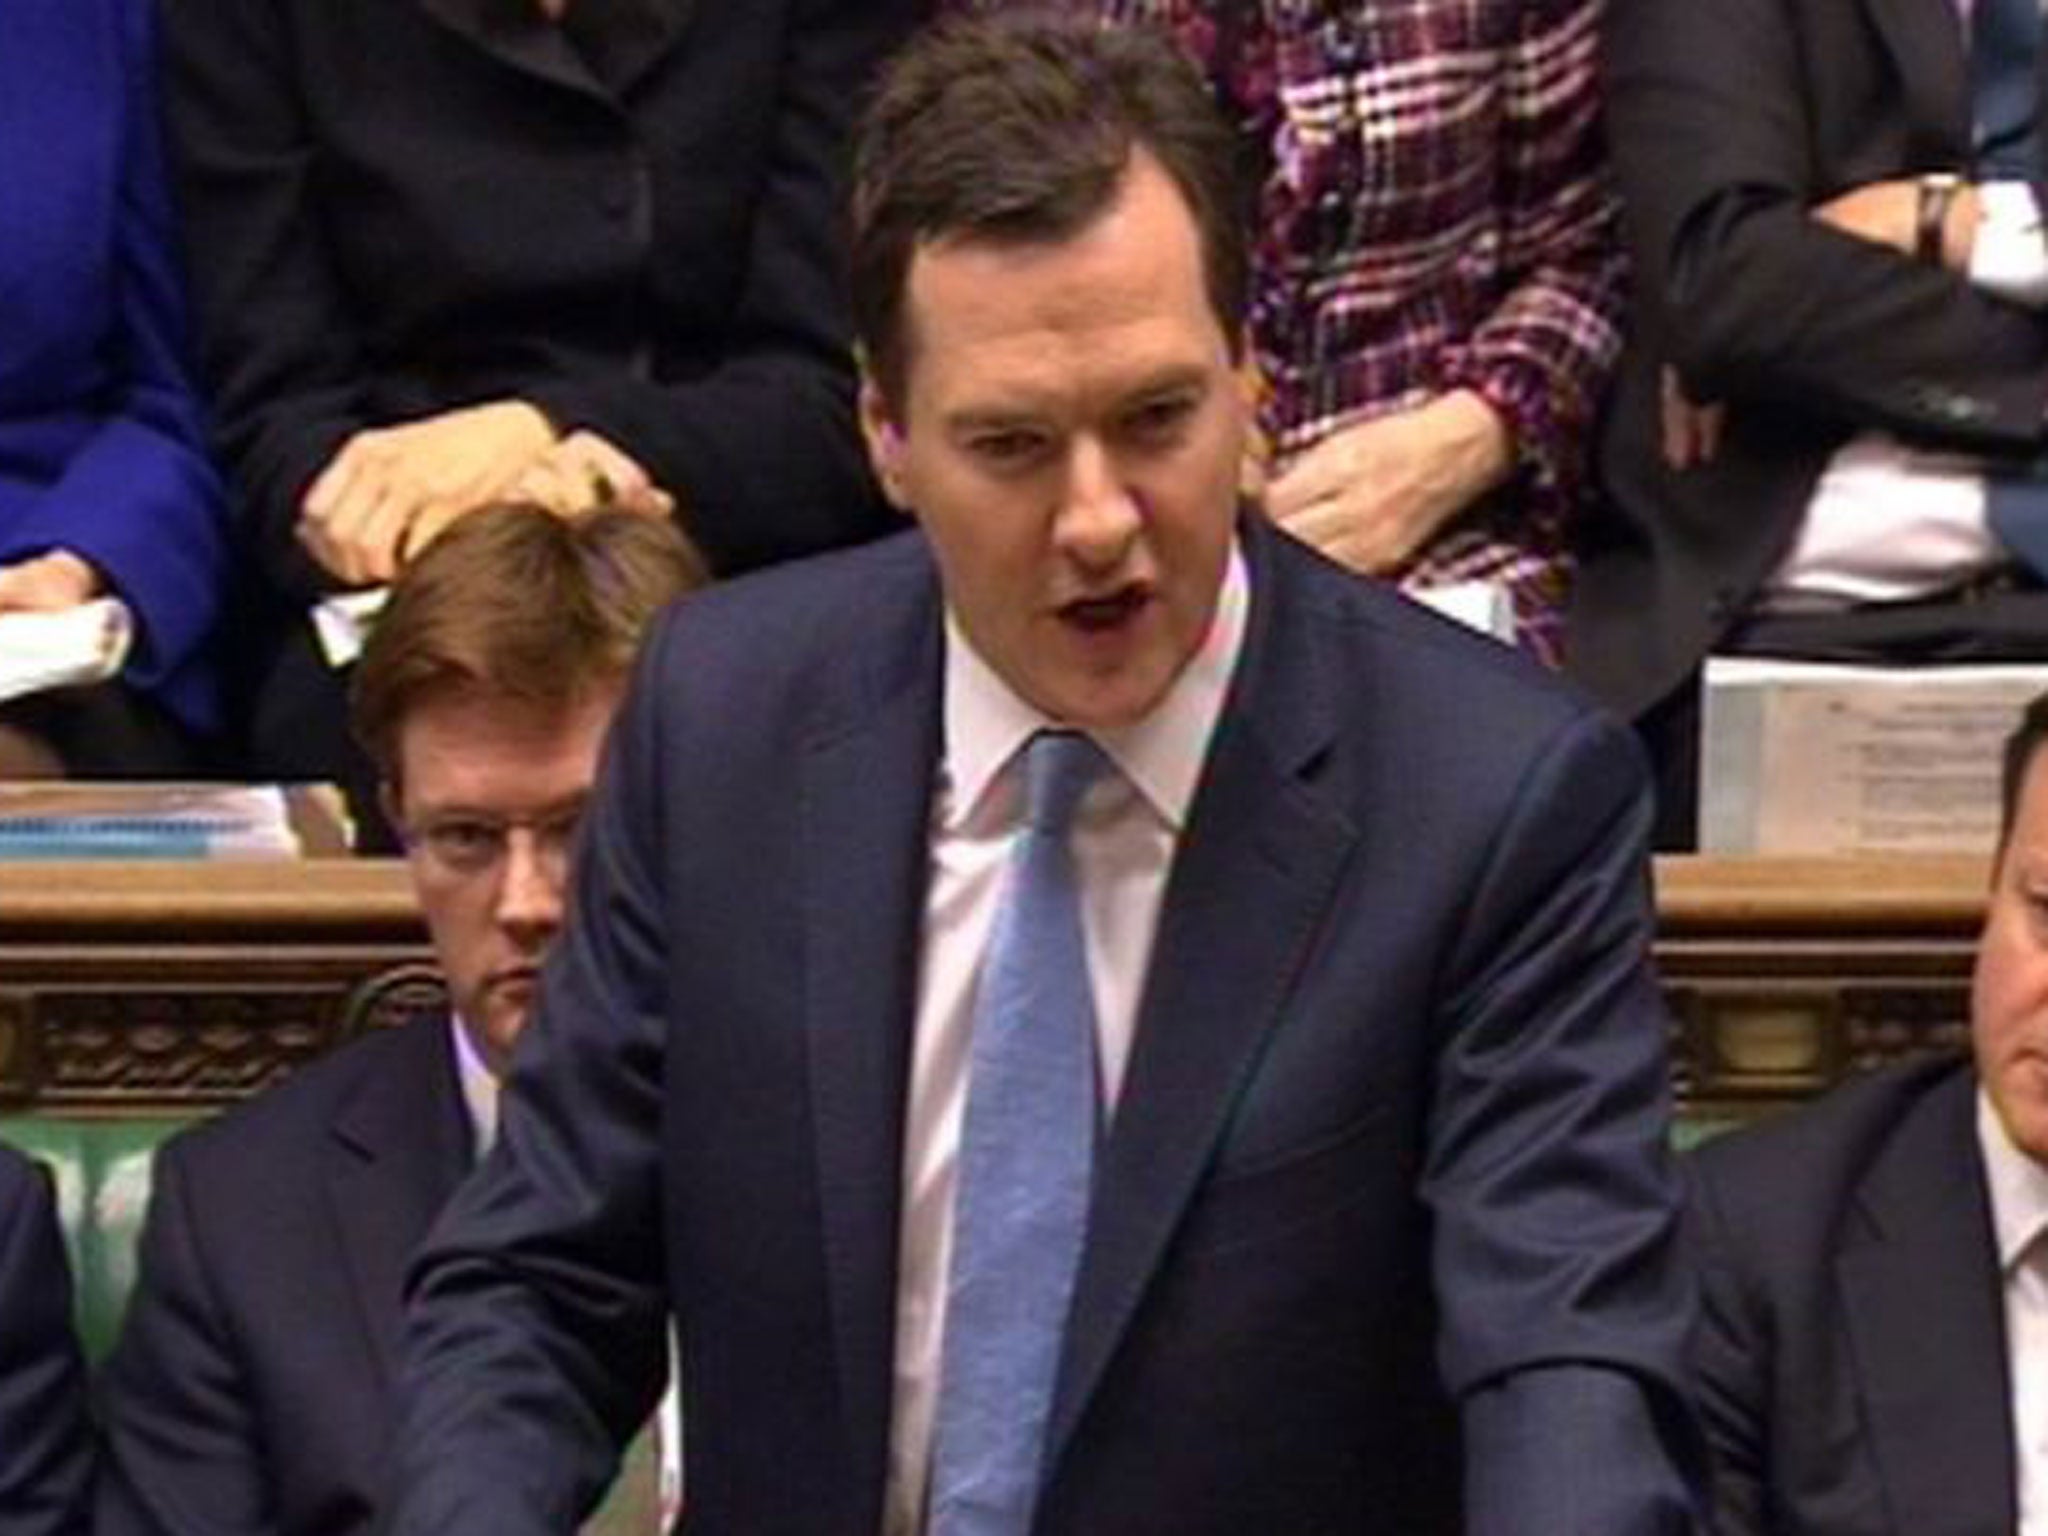 The Chancellor said another eurozone storm would hit the UK economy hard